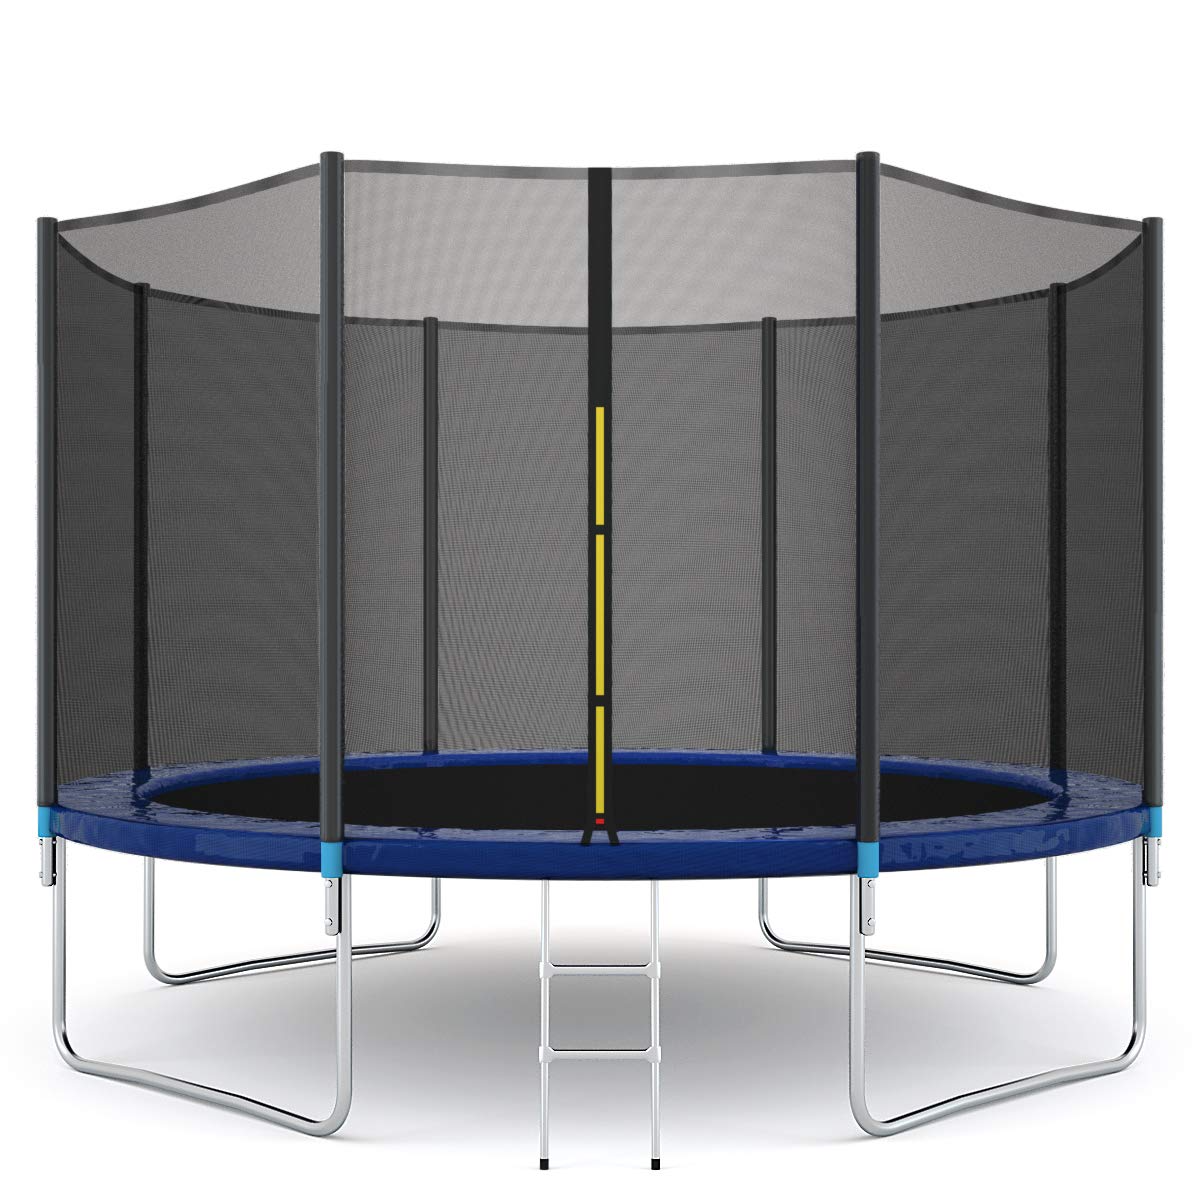  Giantex Trampoline, 16Ft ASTM Certified Approved Outdoor  Trampoline w/Enclosure Net, Recreational Trampolines w/Jumping Mat Ladder  Rust-Resistant Poles for Kids Adults : Sports & Outdoors